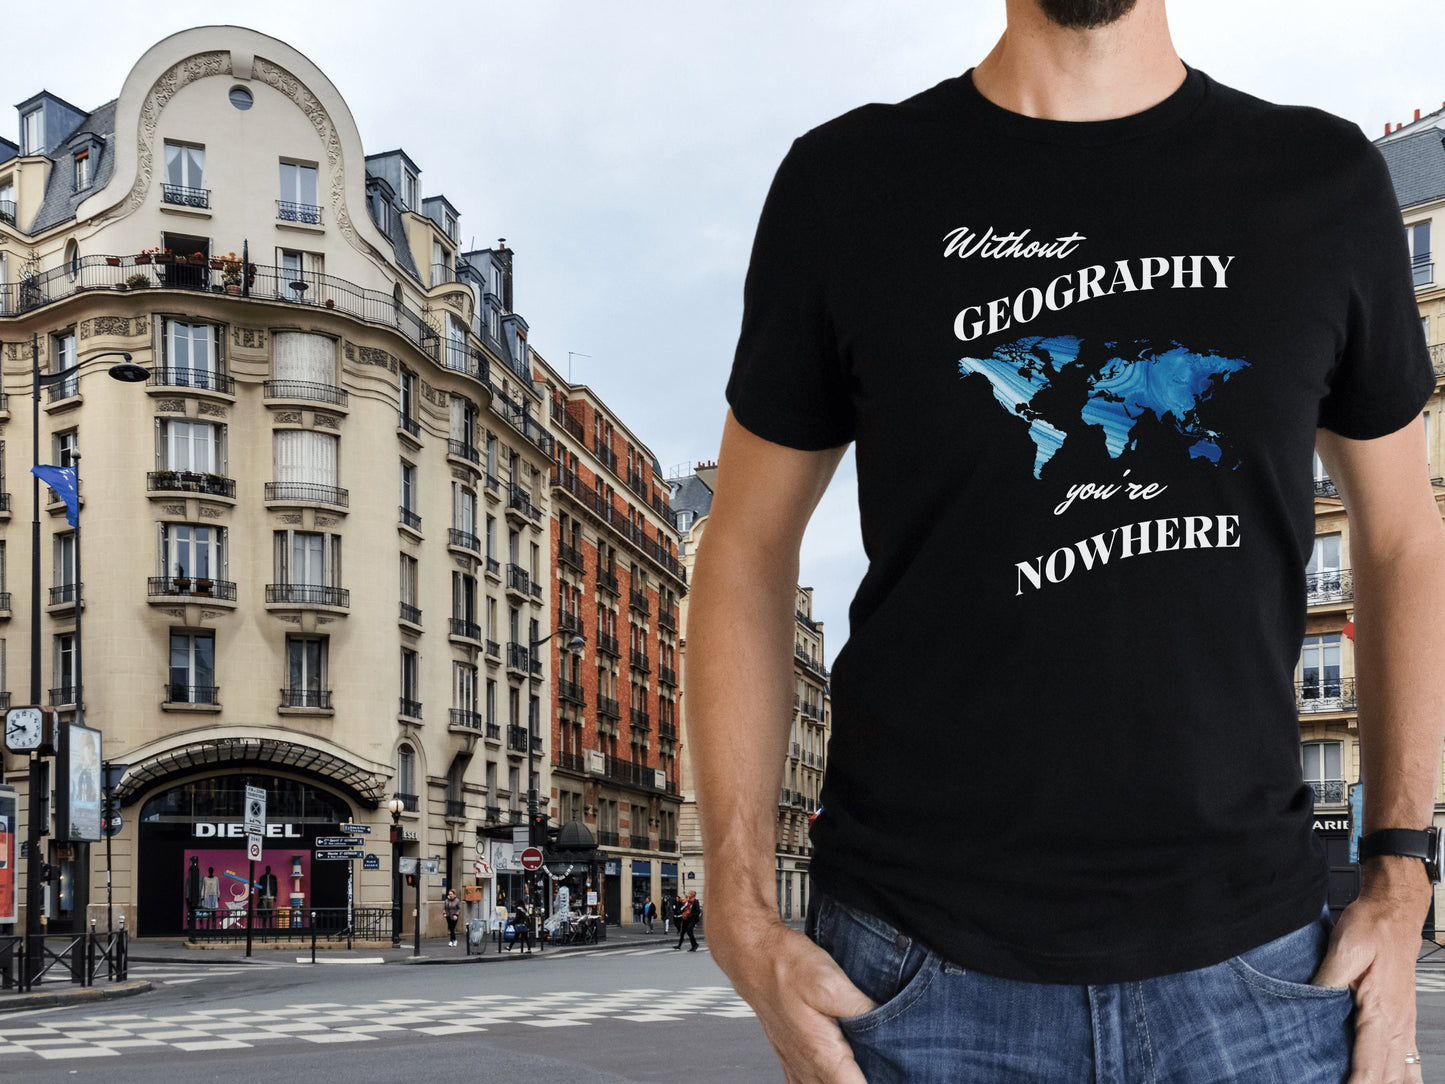 Geography Teacher Shirt, Without Maps You're Nowhere Shirt, Gifts for Teacher, Map Lover Gift, Travel Lover Gift